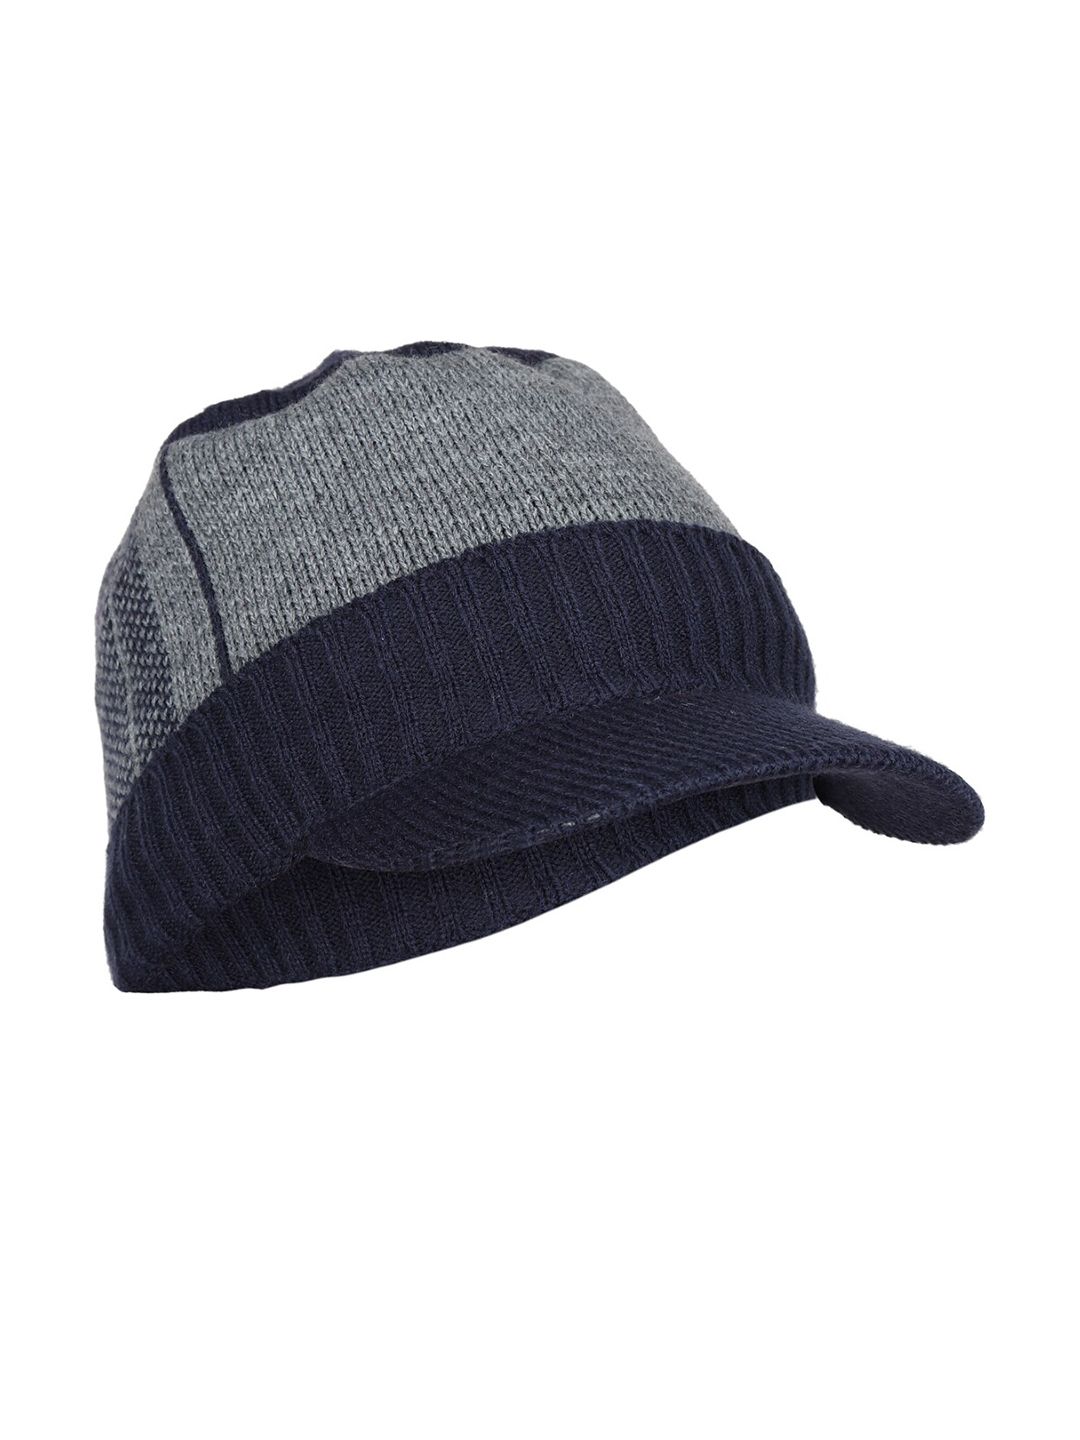 iSWEVEN Unisex Blue & Grey Solid Woven Expandable Visor Cap Price in India